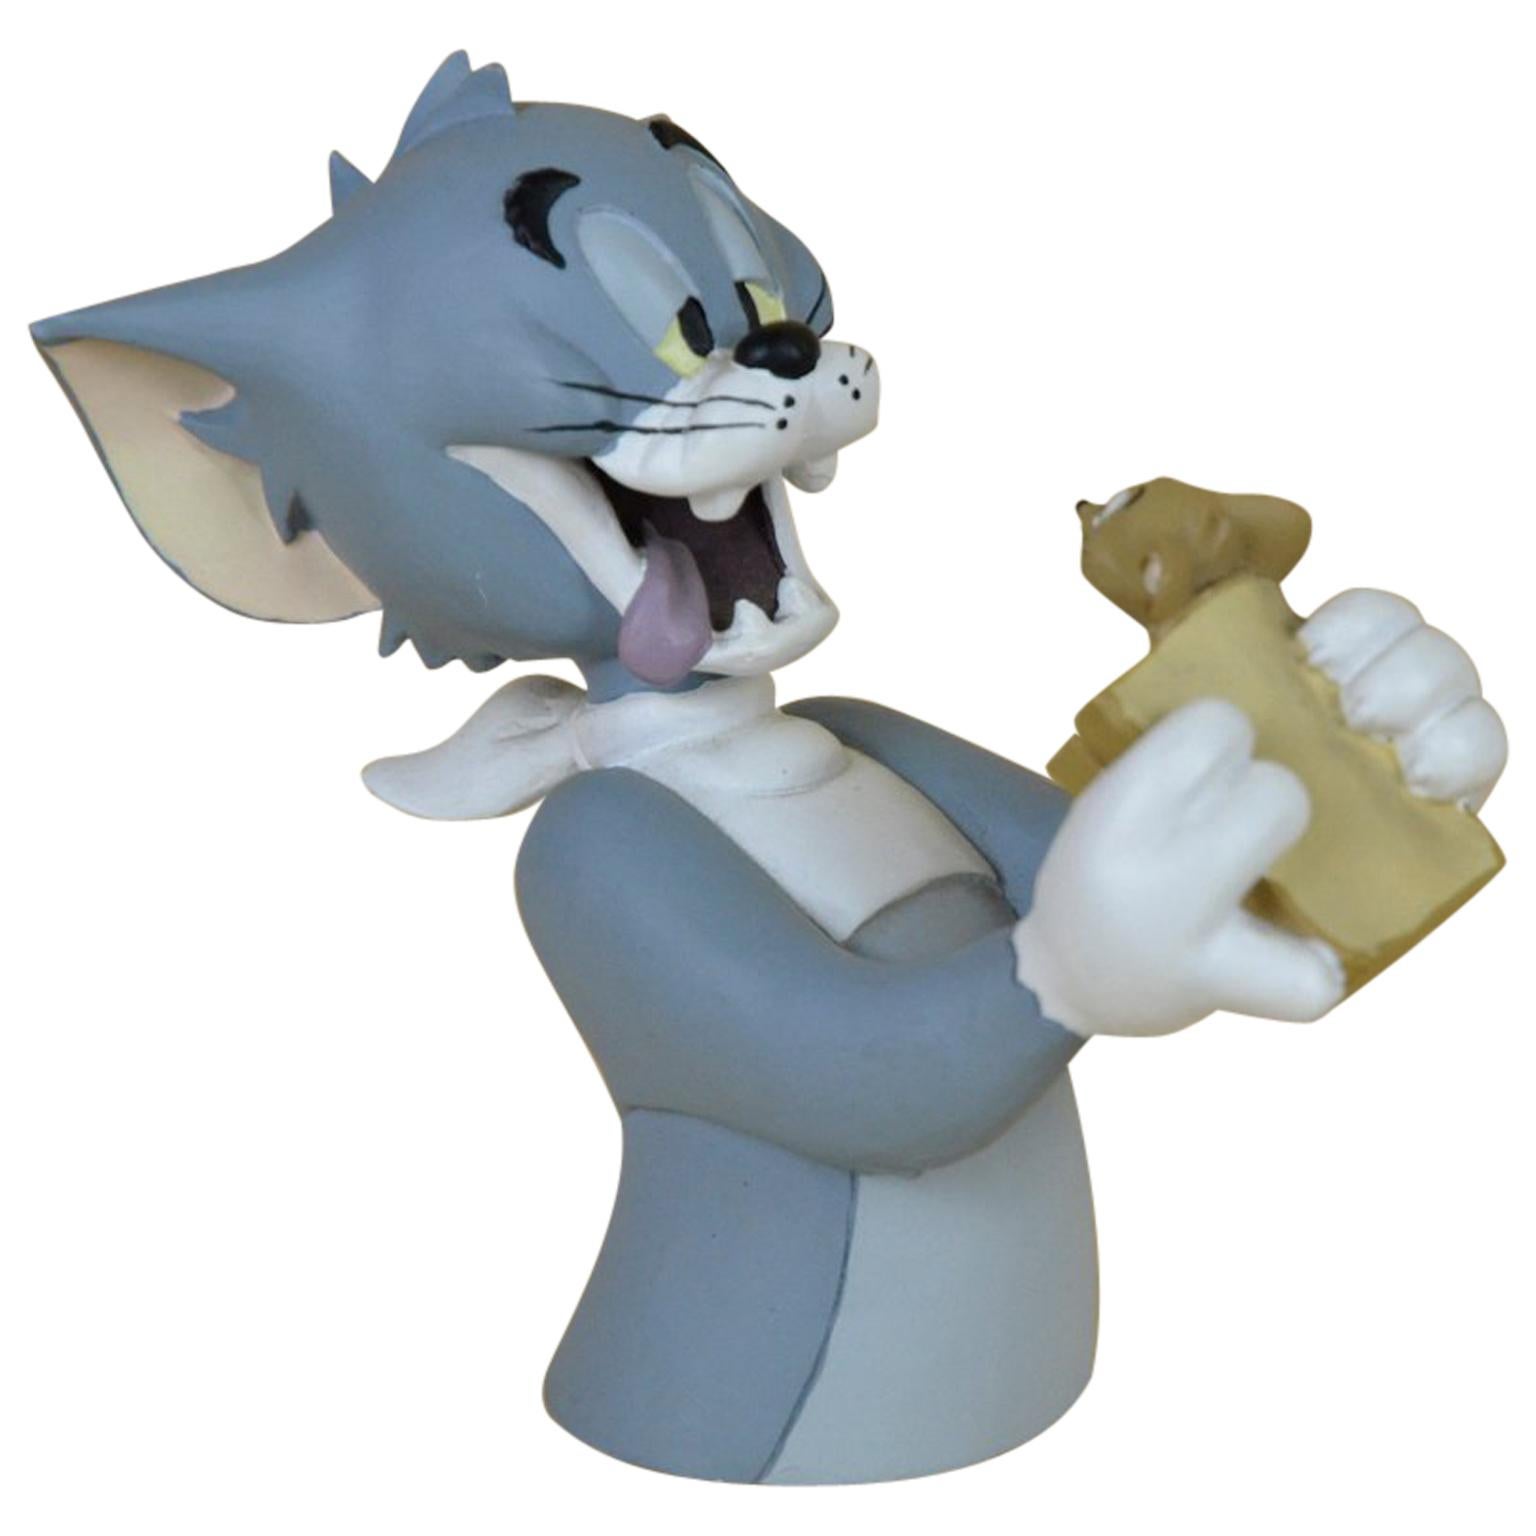 1990s French Vintage Hanna-Barbera Tom and Jerry Statue by Demons & Merveilles For Sale